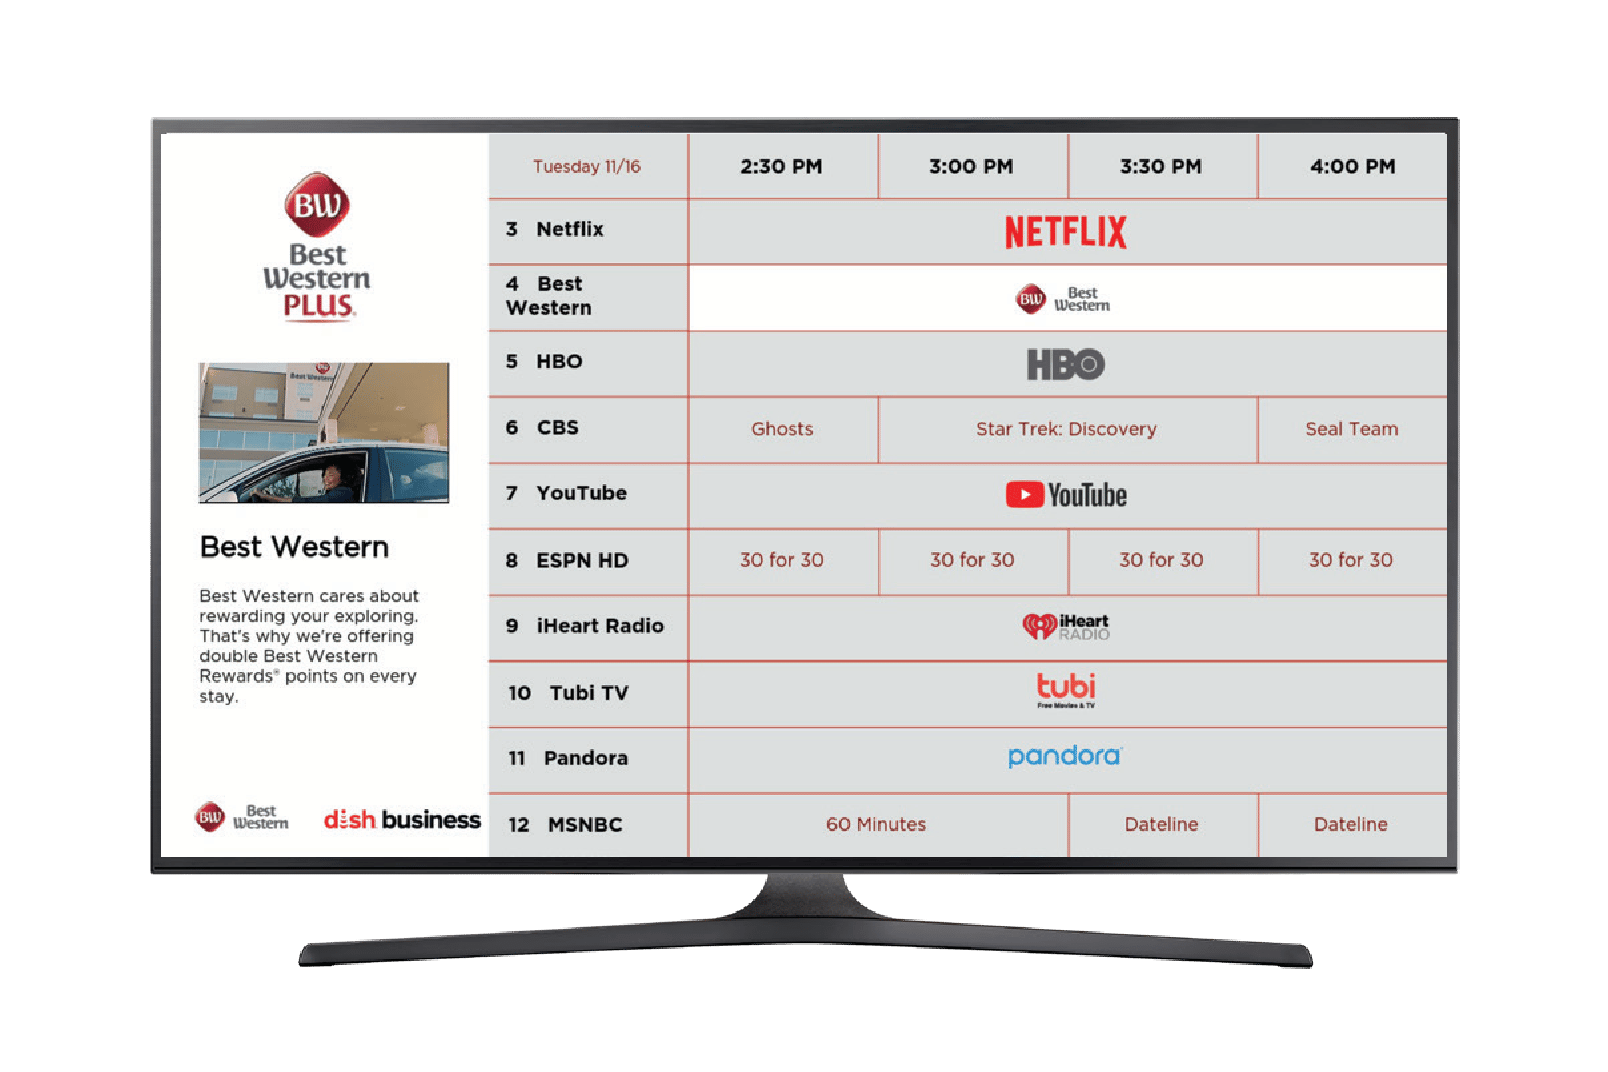 Enseo's Interactive Program Guide provides details of current TV programming, by Dish Business, and shortcuts to view the content as well as streaming apps.